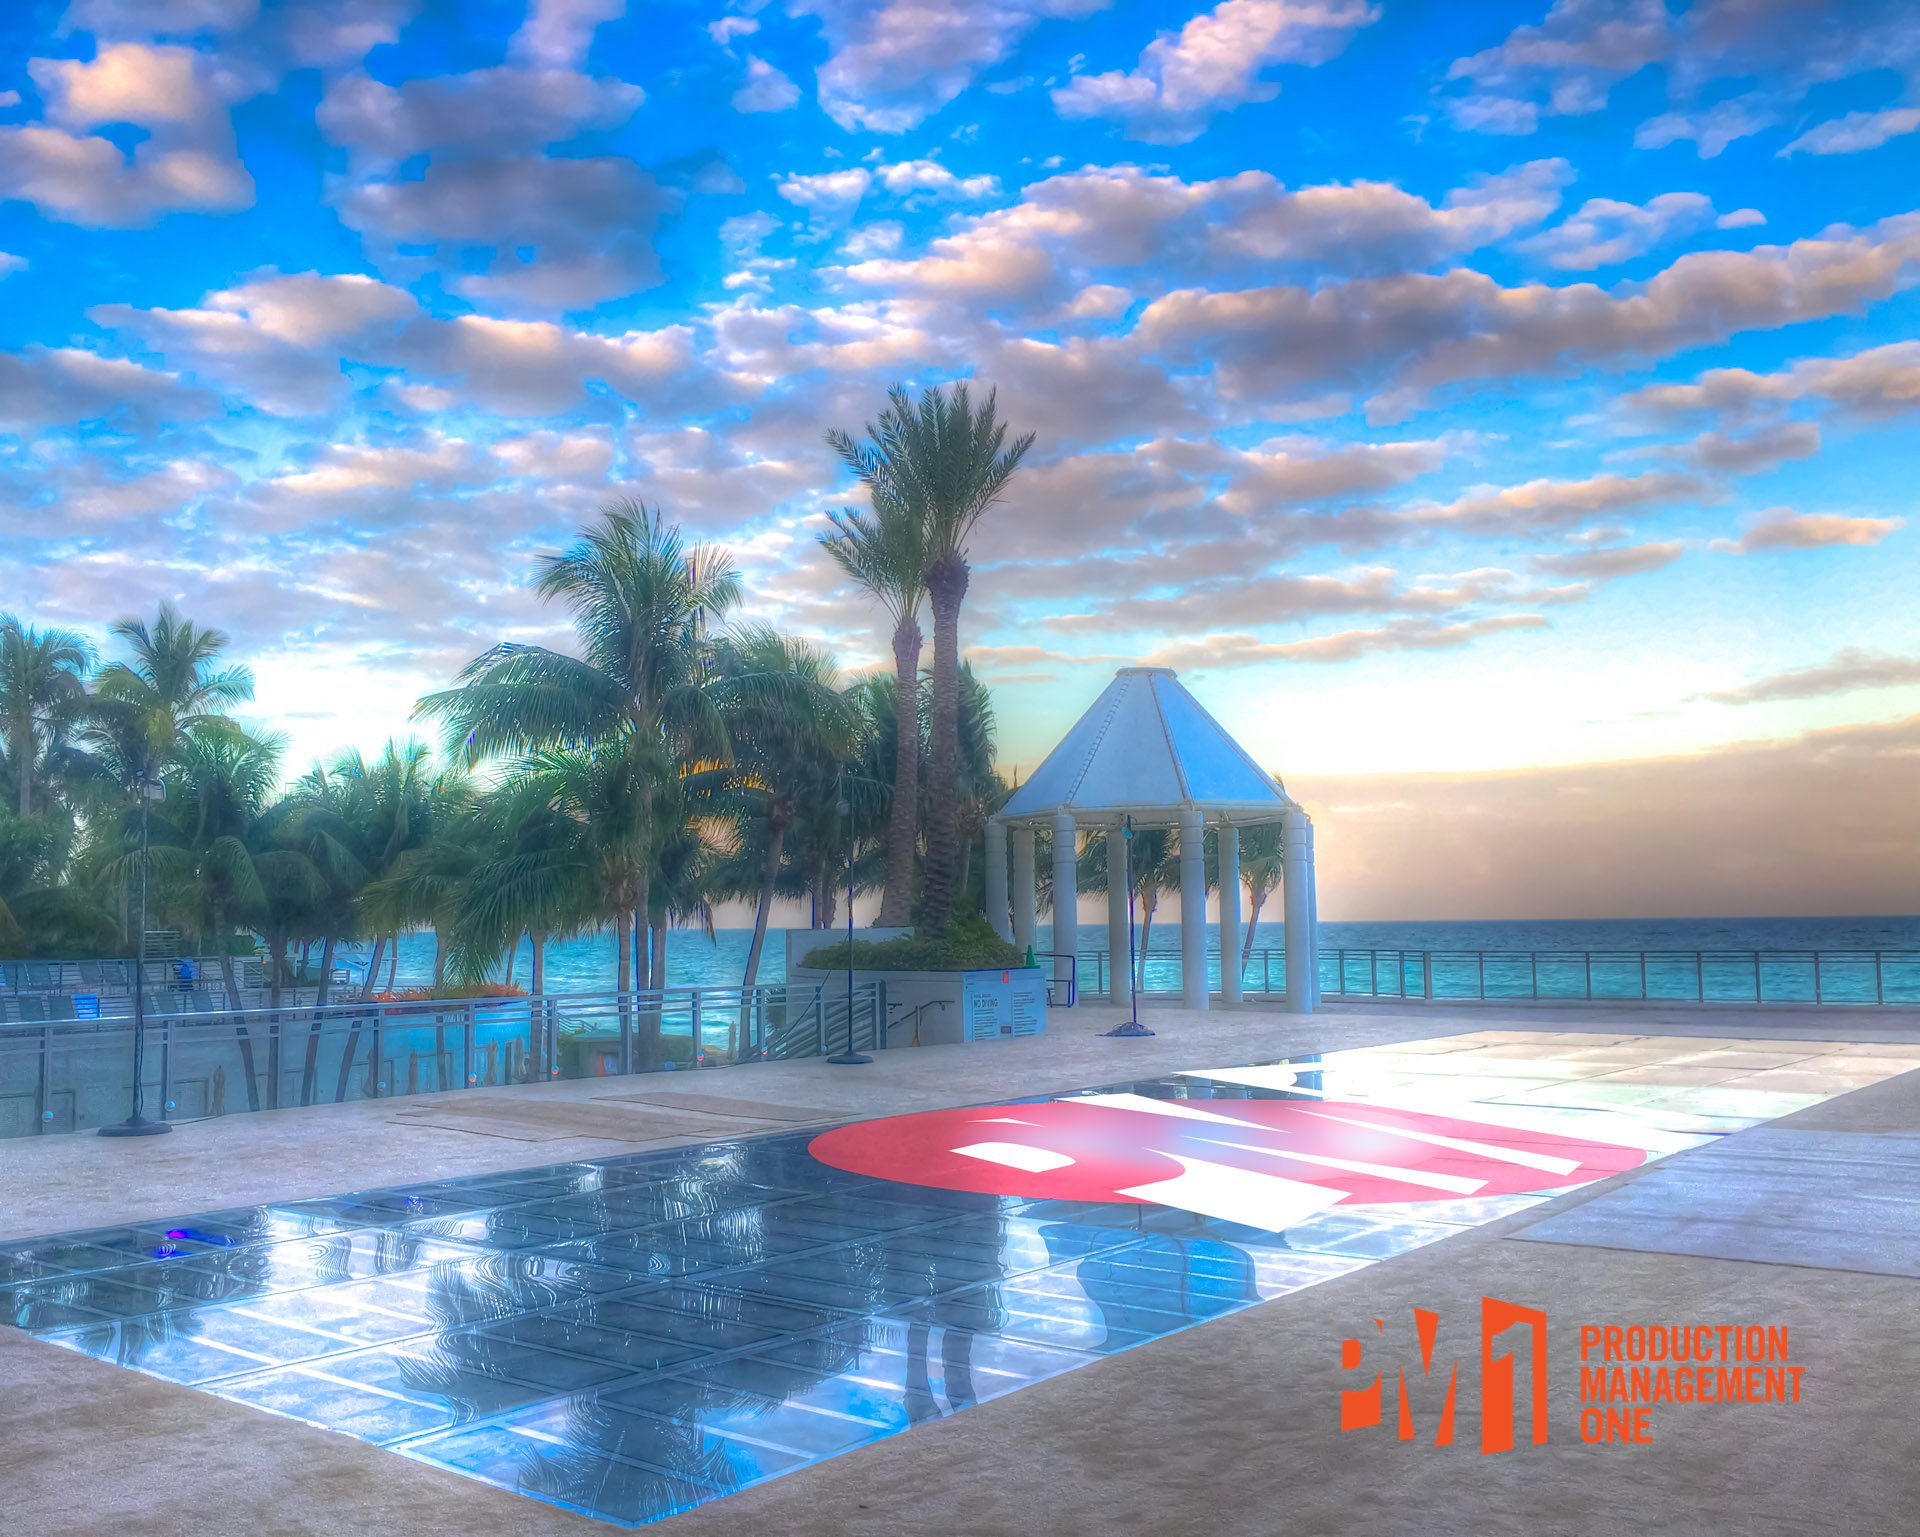 Trade Show Pool Cover in Fort Lauderdale, Florida